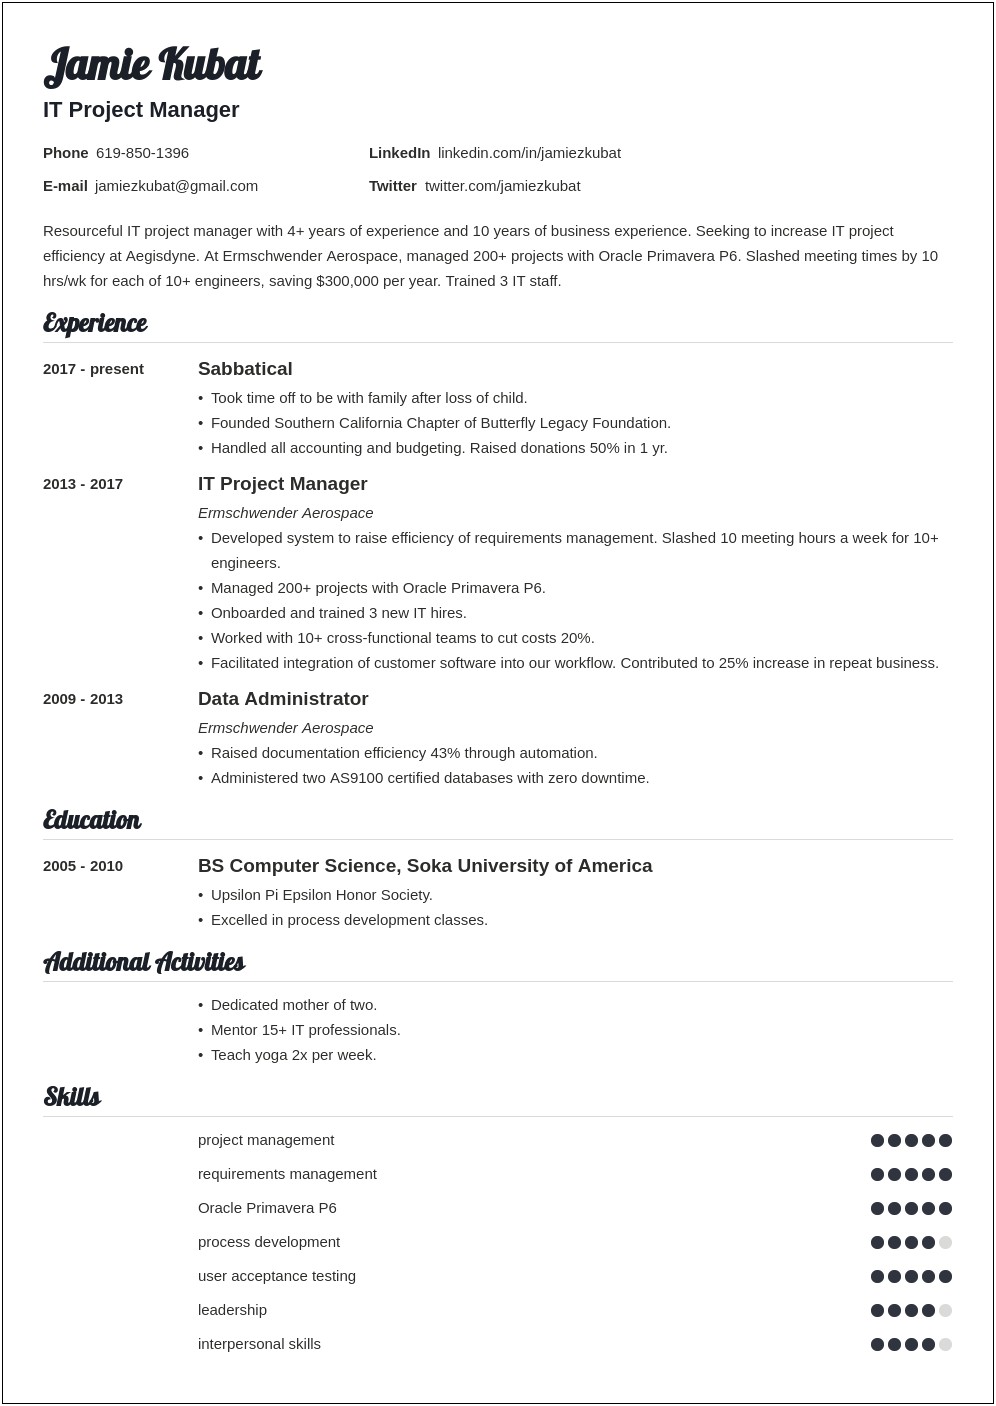 Best Resumes For People Over 50